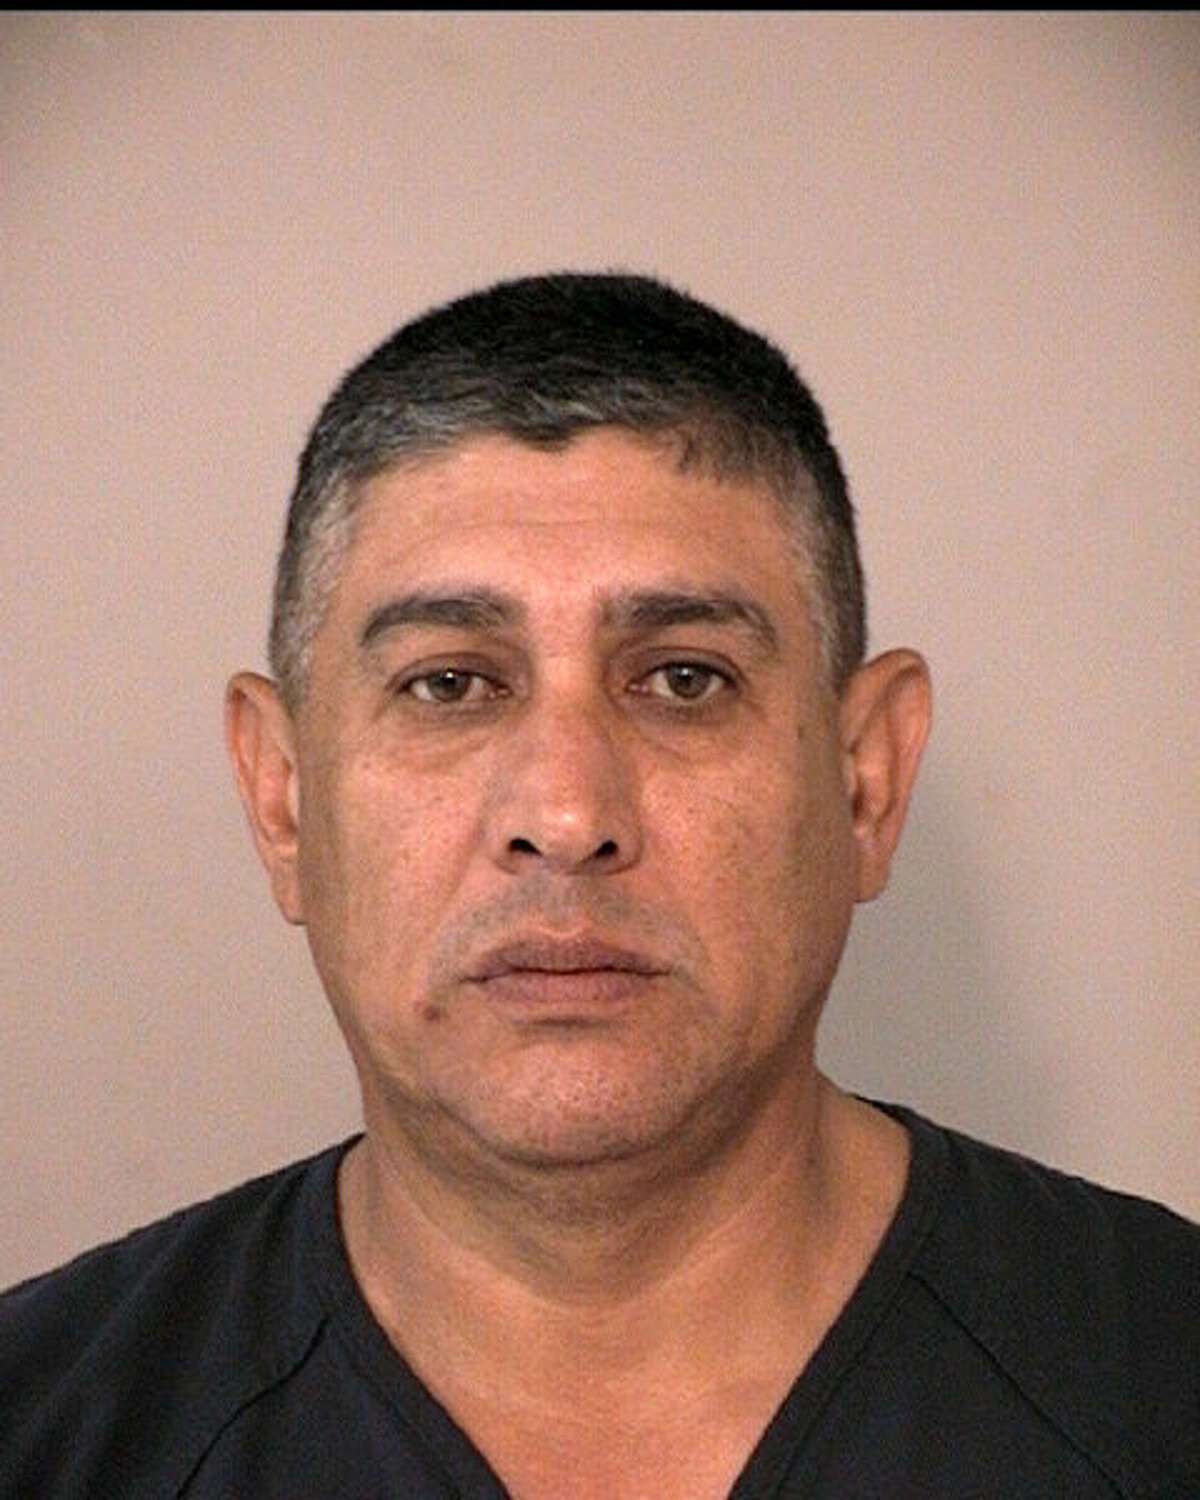 Alfredo Martinez, 50, of Rio Grande City, Texas, was arrested and charged with manufacturing/delivery of a controlled substance and unlawful use of a criminal instrument.